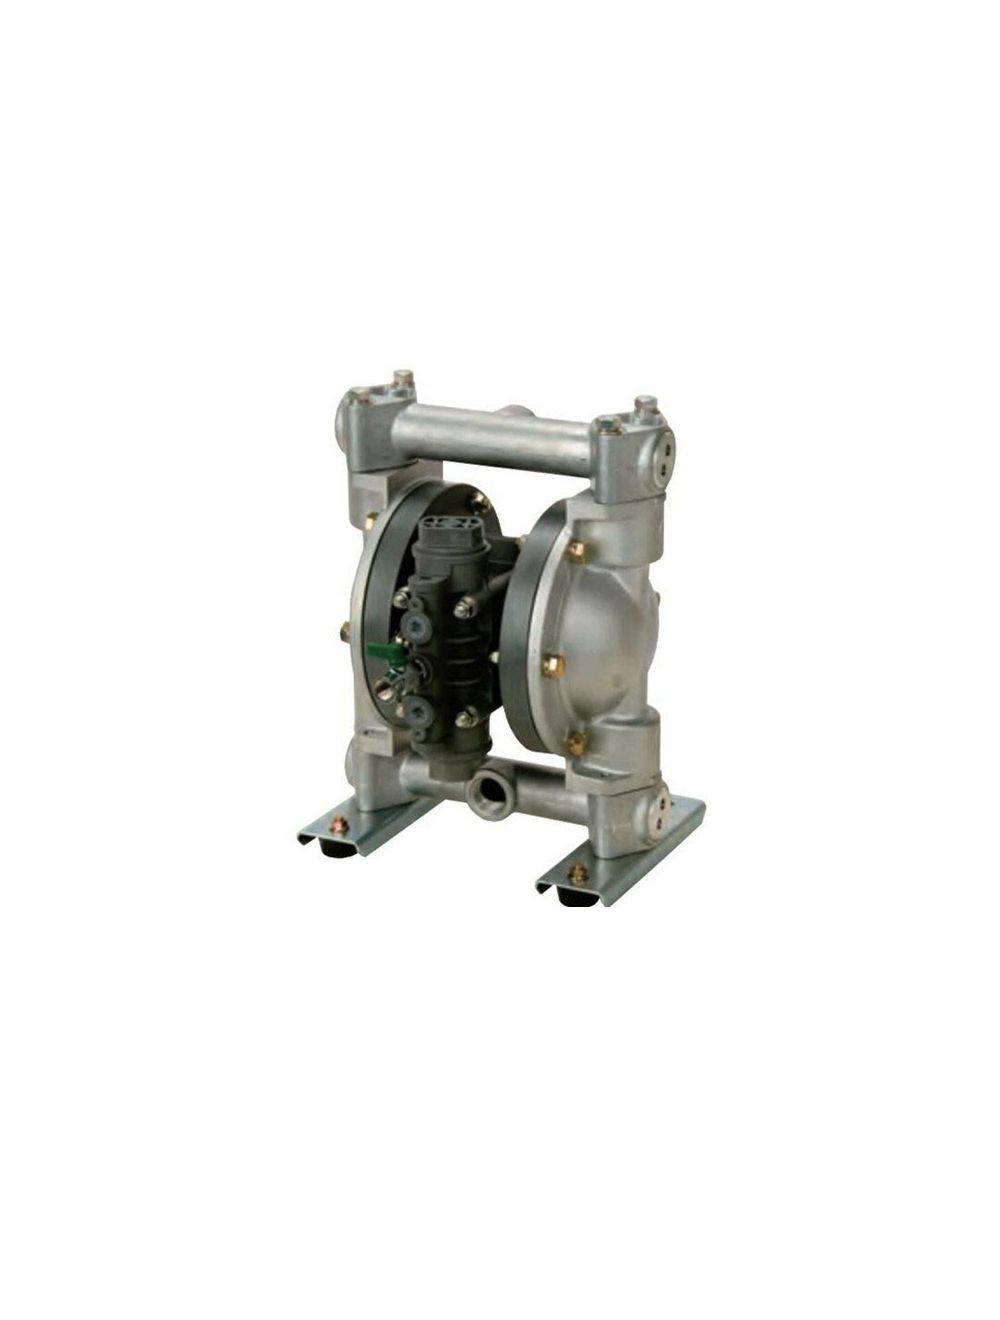 New In stock for sale, yamada Diaphragm Pump NDP-25BAC